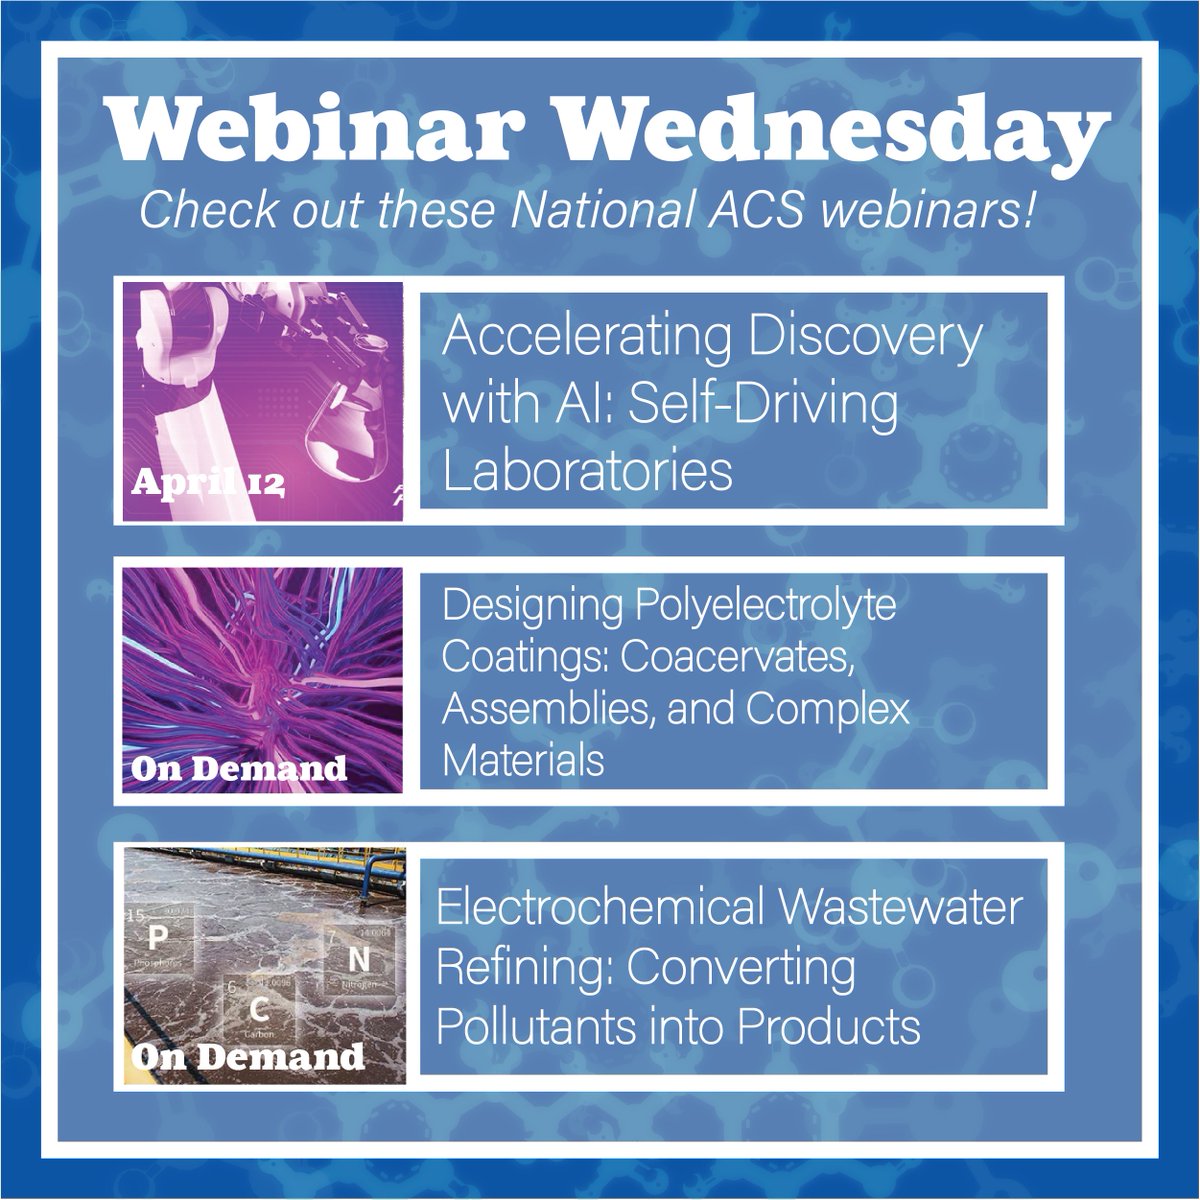 Did you know that National ACS produces webinars? Check out these webinars at acs.org/acs-webinars.h…. Images used in this post are from acs.org.